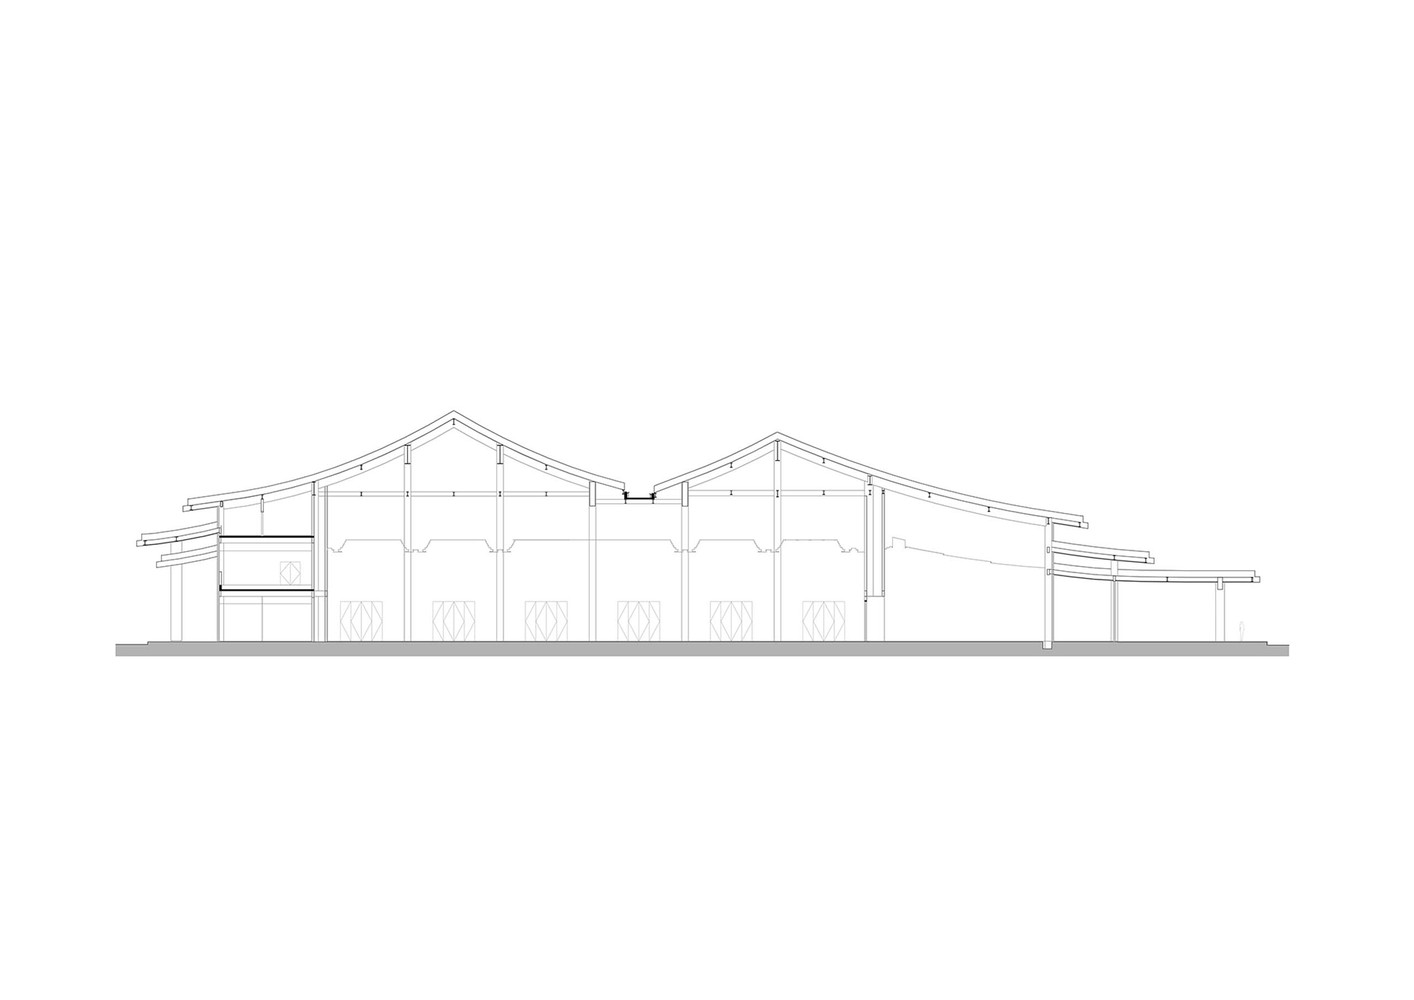 Drawing07_Section_of_the_Multi-Purpose_Hall.jpg